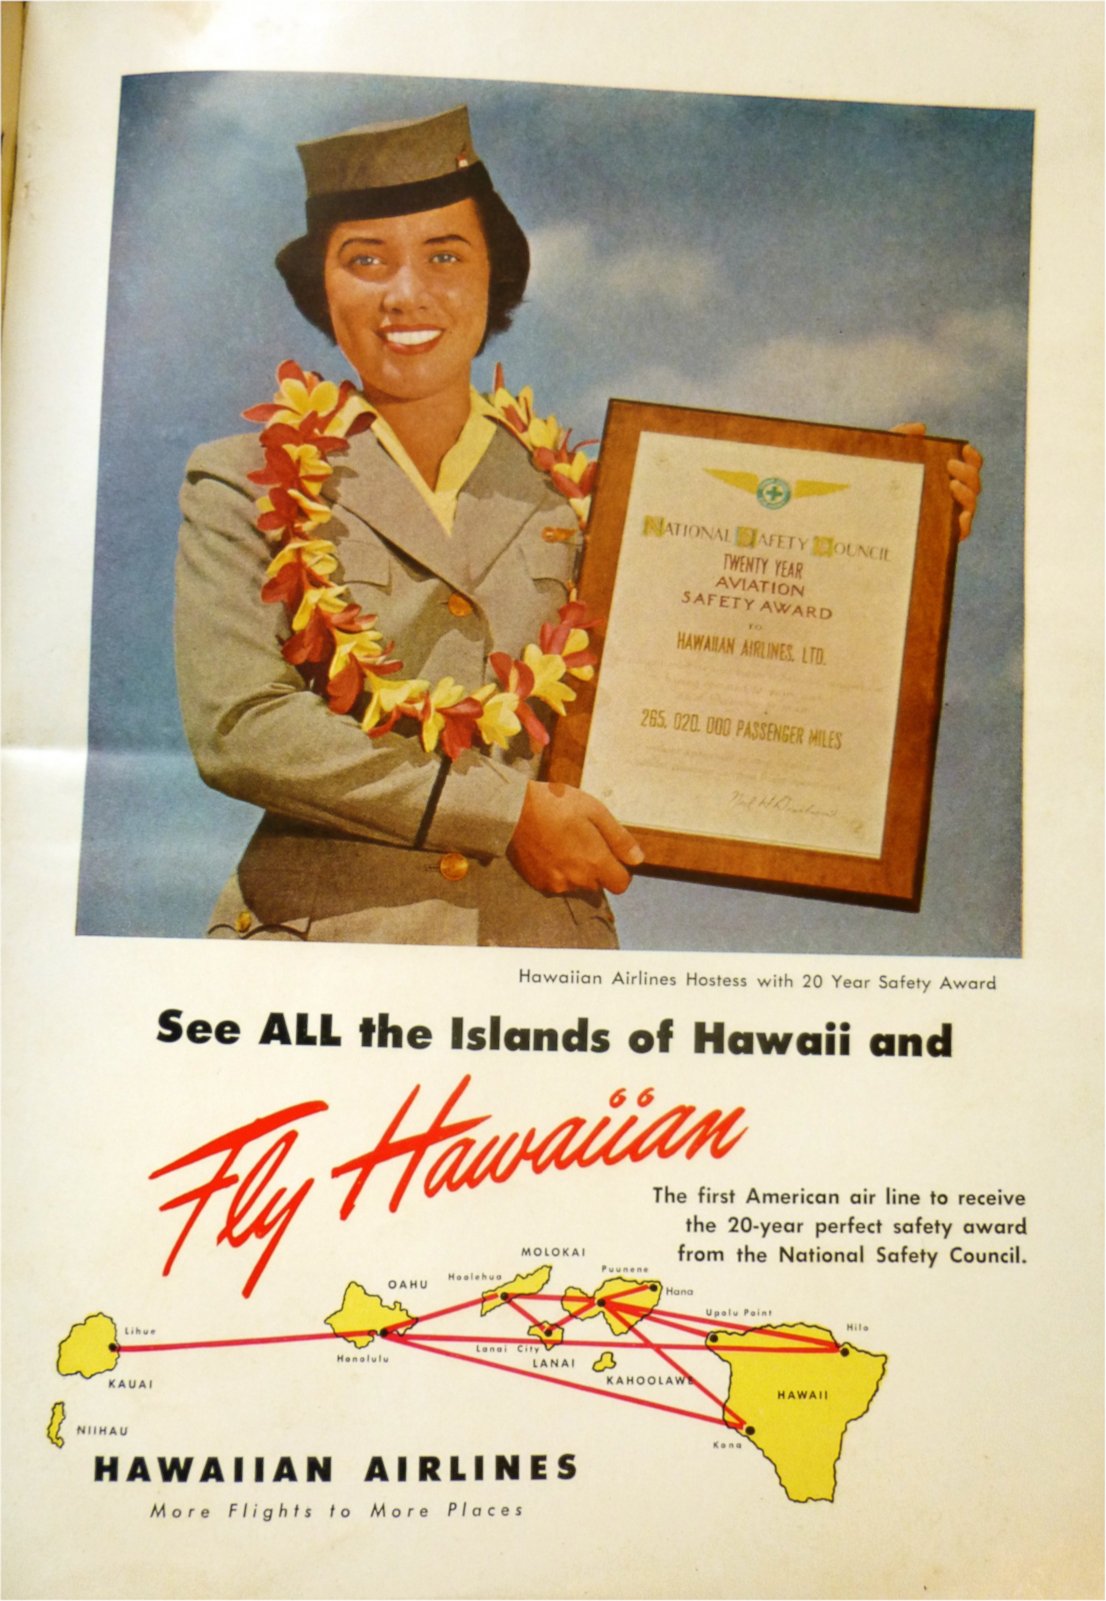 PHOTO: In 1950, the National Safety Council presented Hawaiian Airlines with a 20-year perfect safety award, the first airline in history to win this award. 